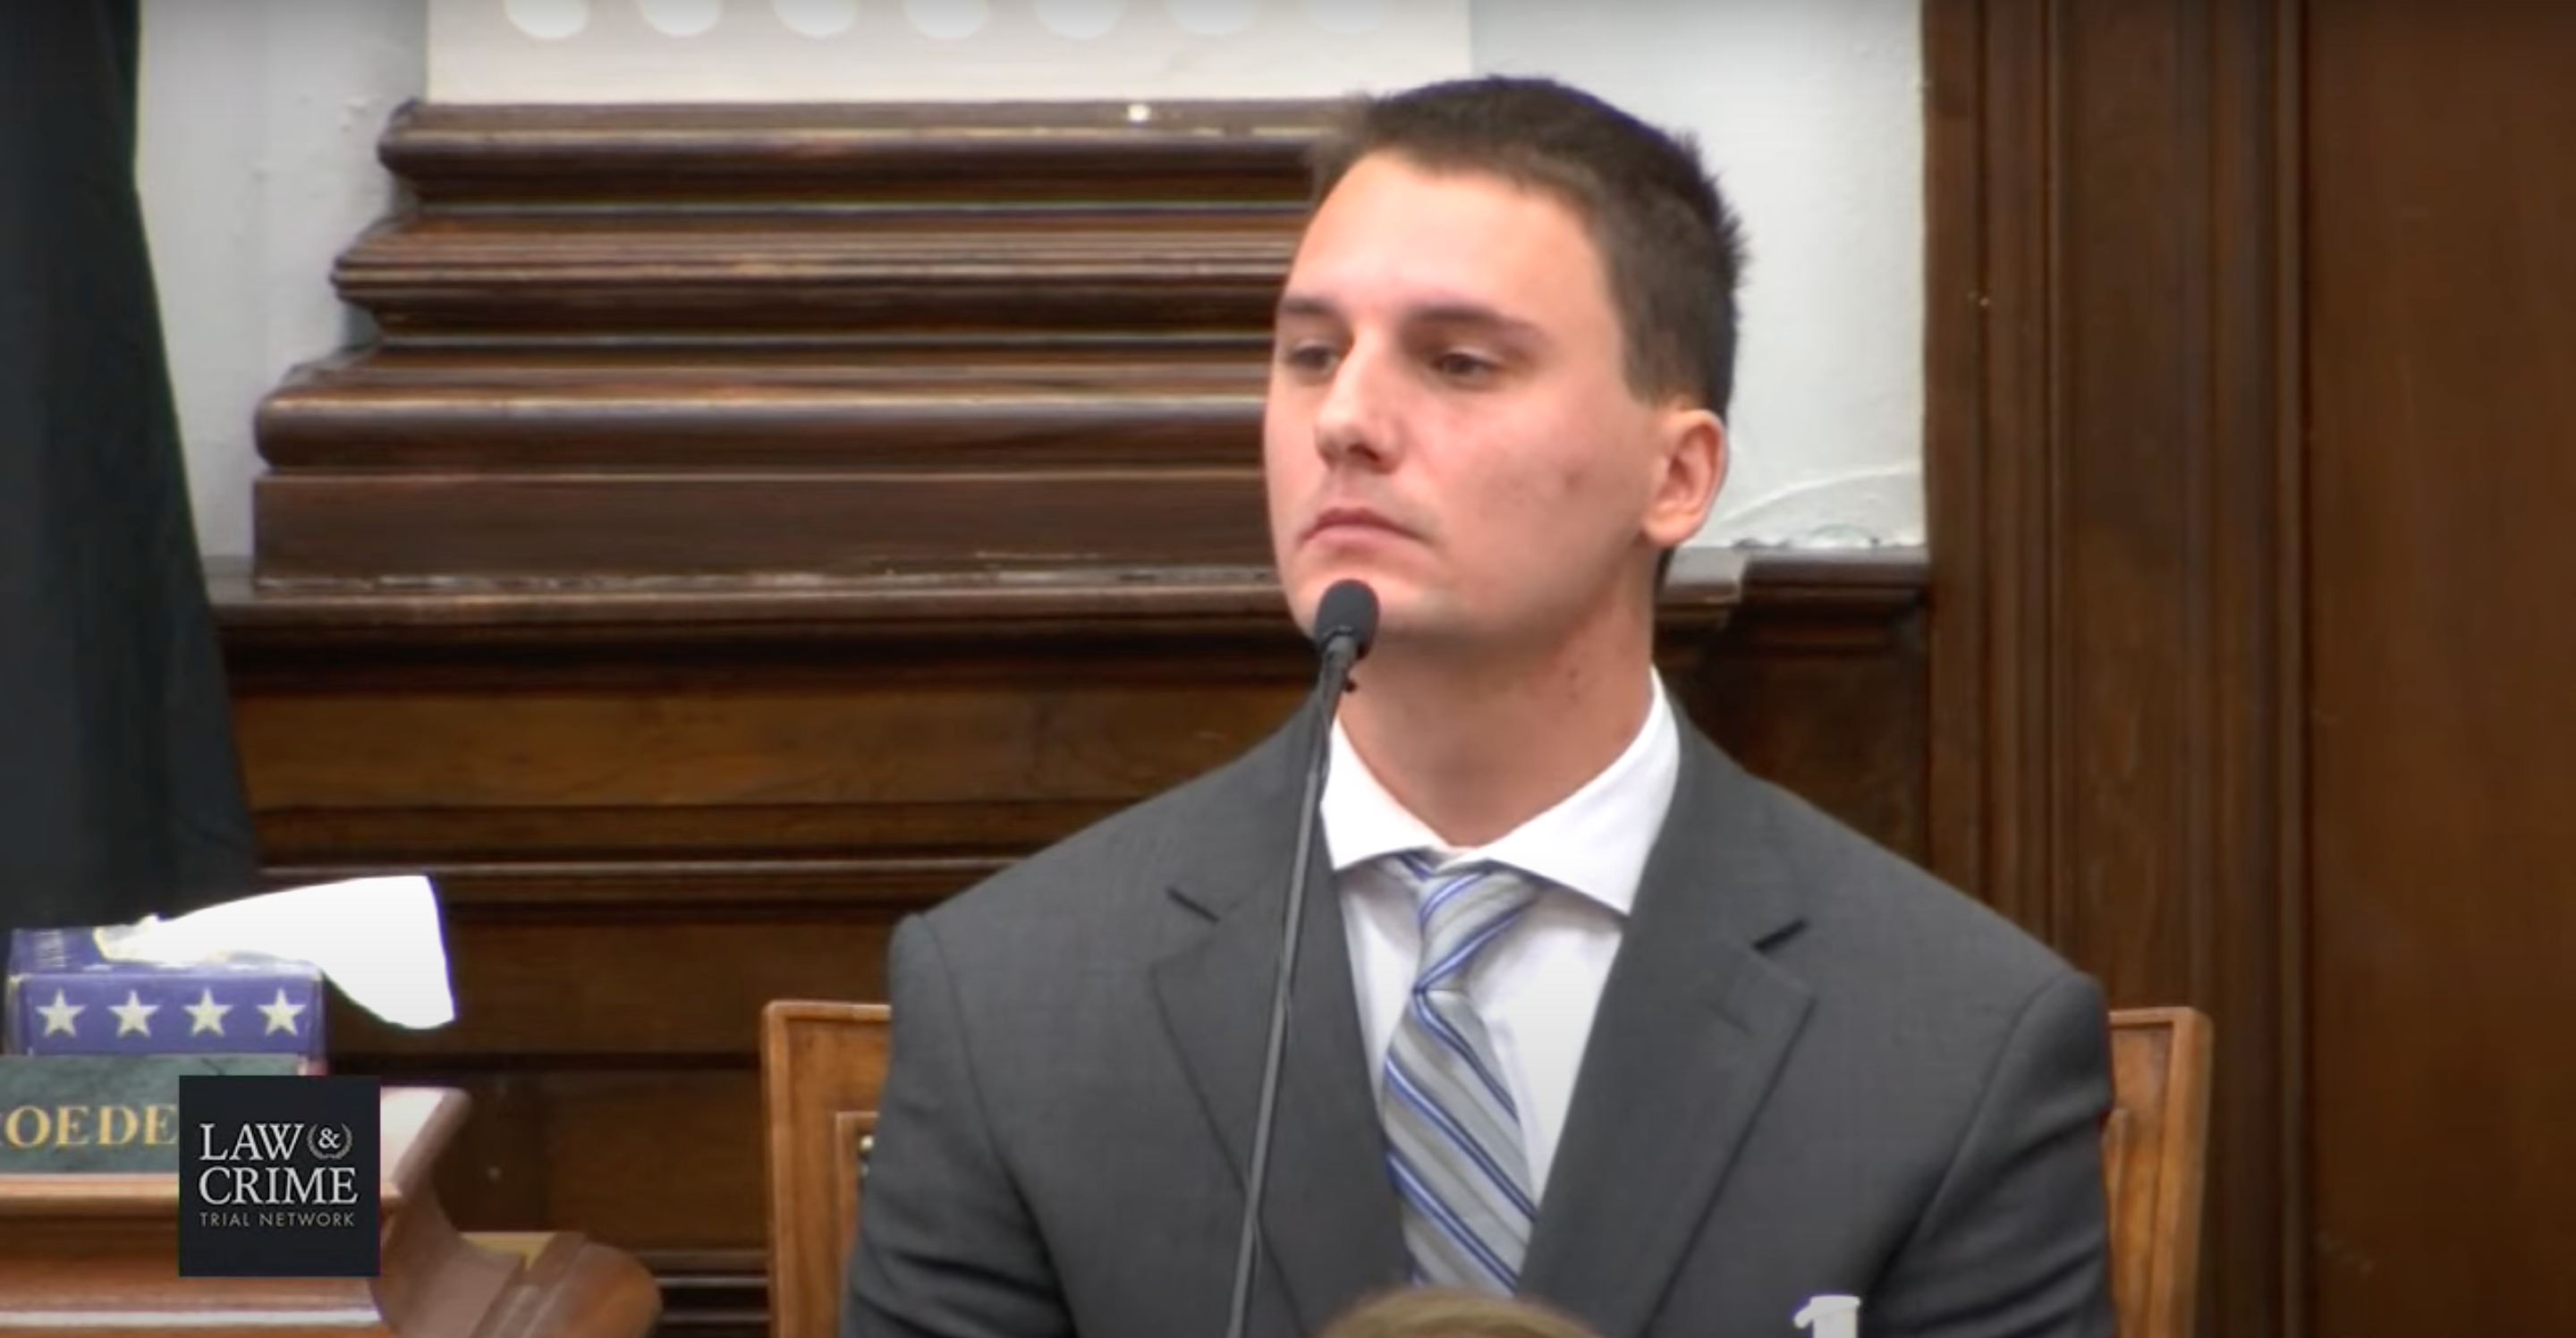 Witness Jason Lackowski, a former member of the U.S. Marine Corps, testified on Friday, Nov. 5, 2021 in the Kyle Rittenhouse trial. (Image via the Law&Crime Network.)